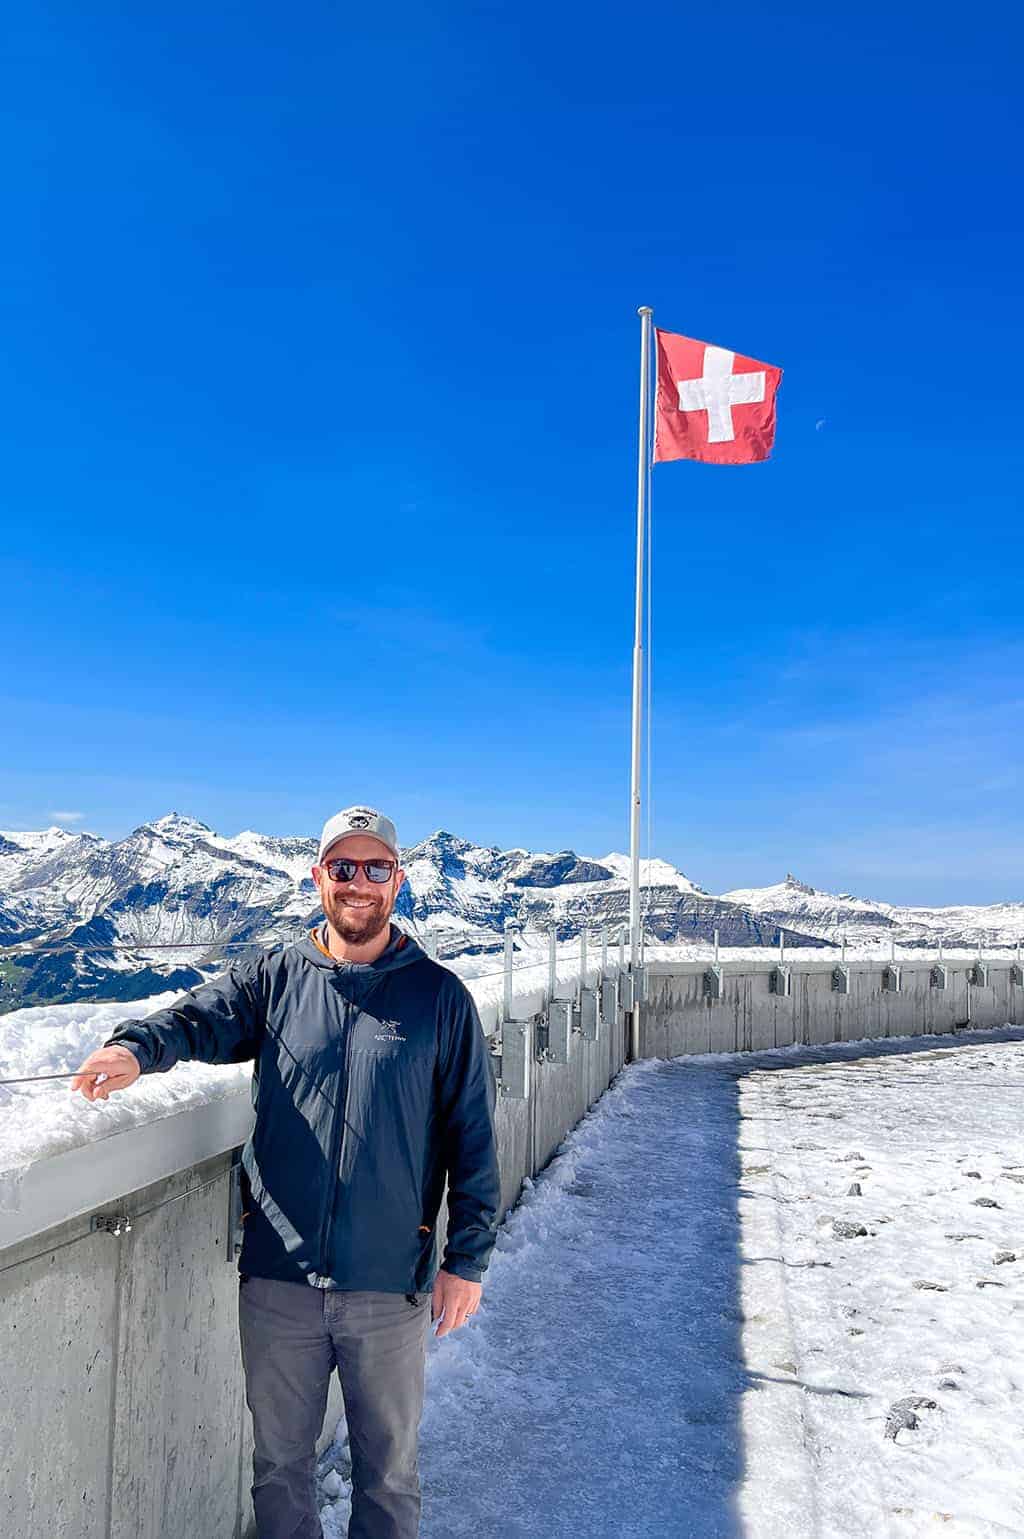 Jungfraujoch – Top of Europe Adventure – view off of the cable car by the Swiss flag